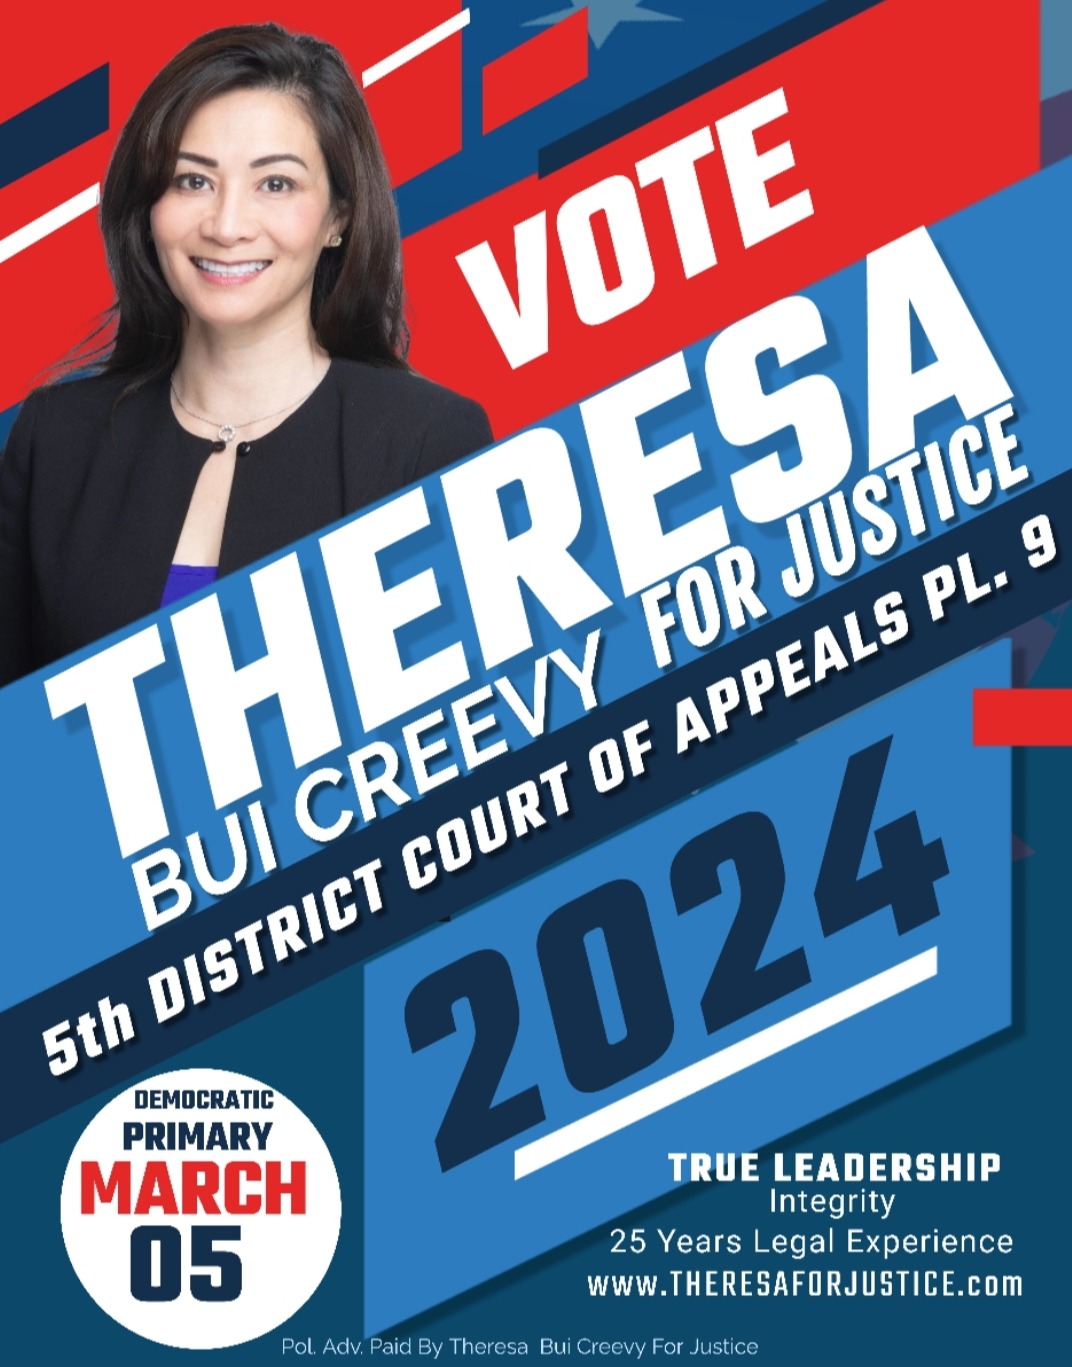 Theresa Bui Creevy for Justice Campaign logo